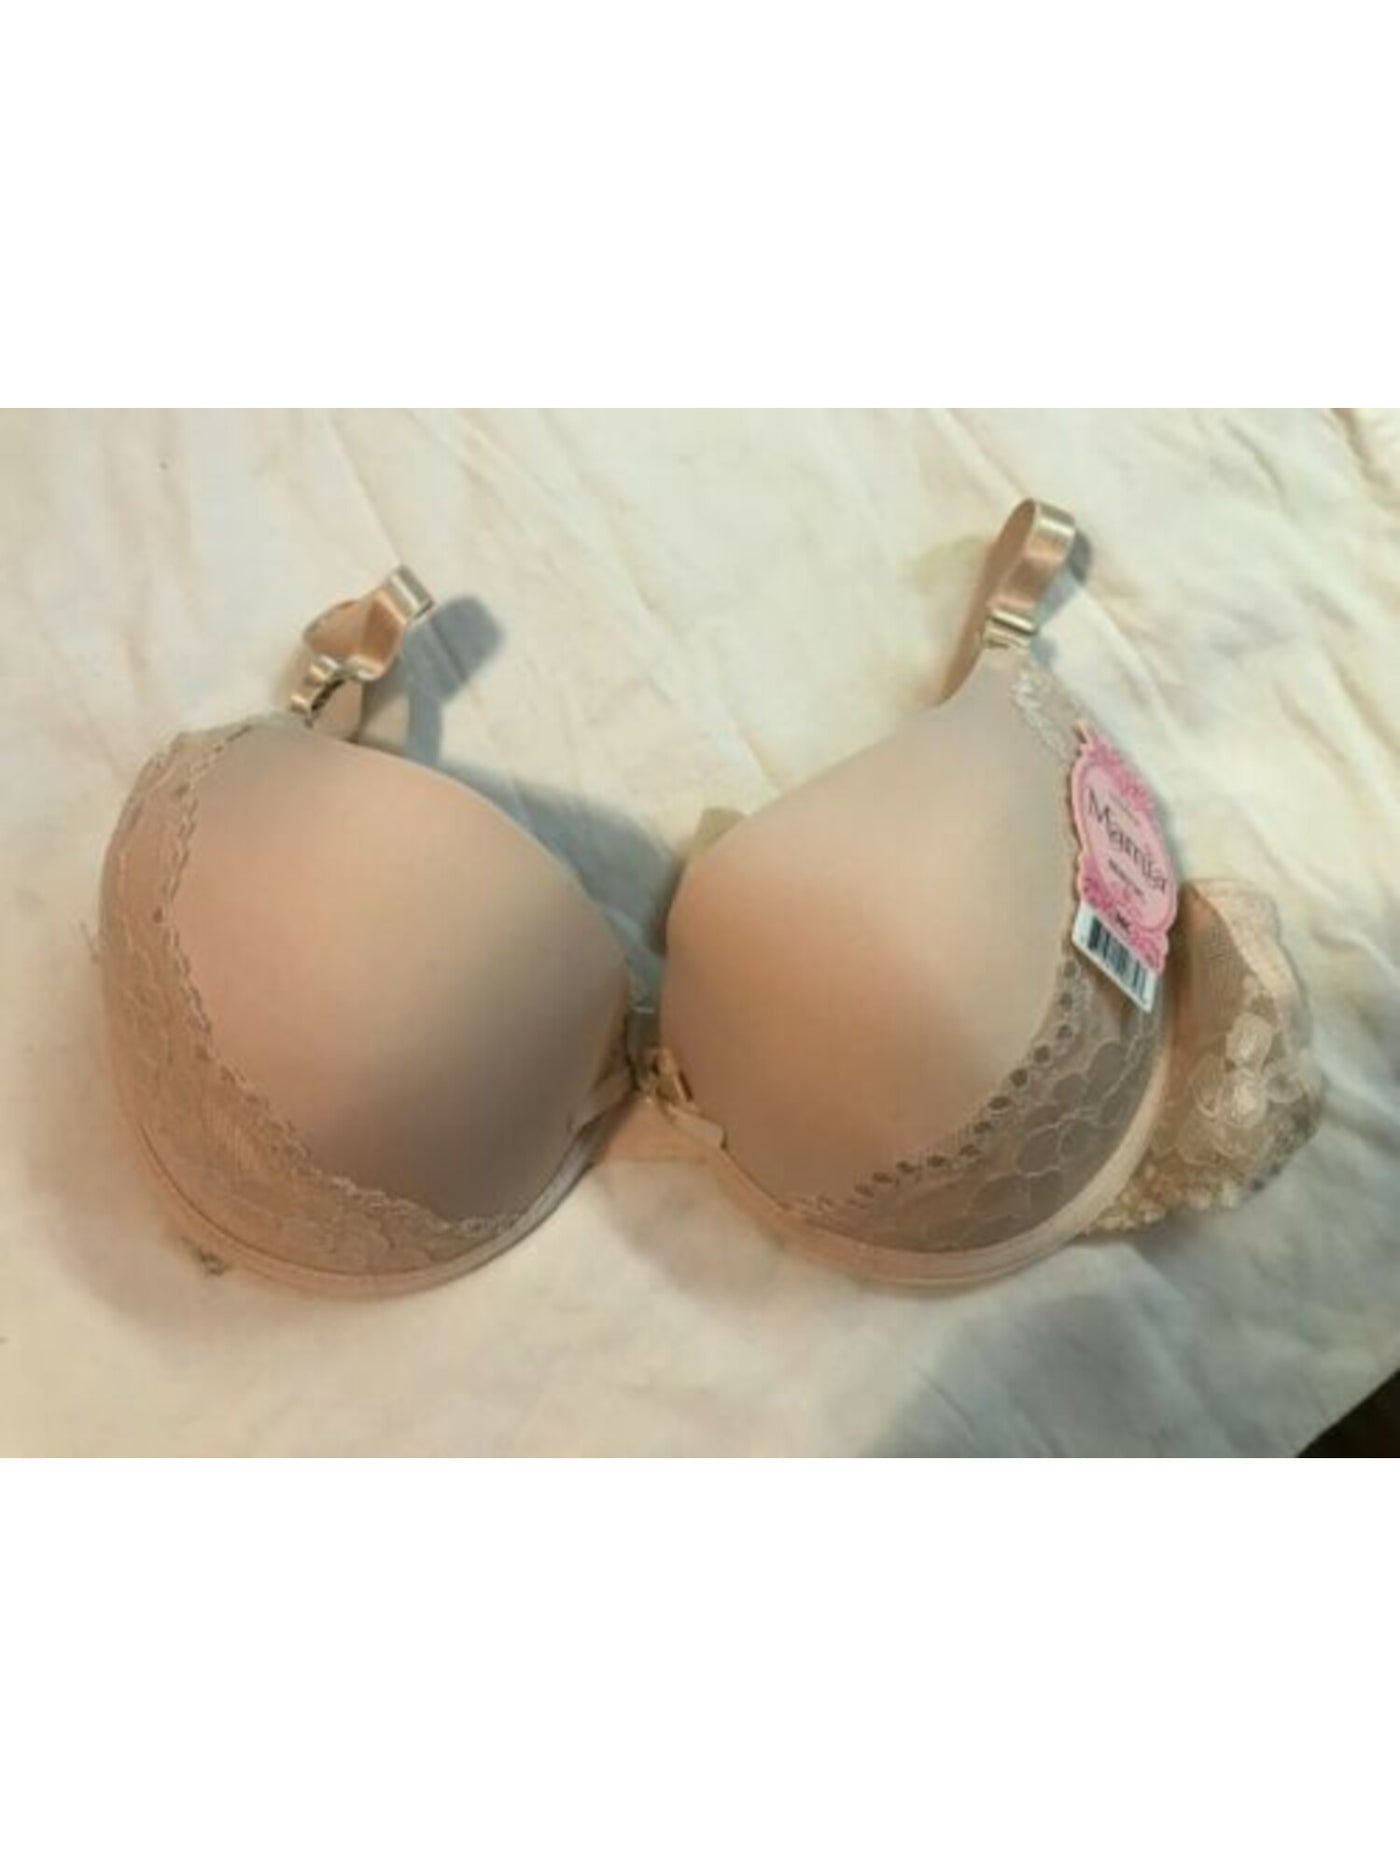 MAMIA Intimates Beige Floral Lace Everyday Underwire Bra Size: 32B